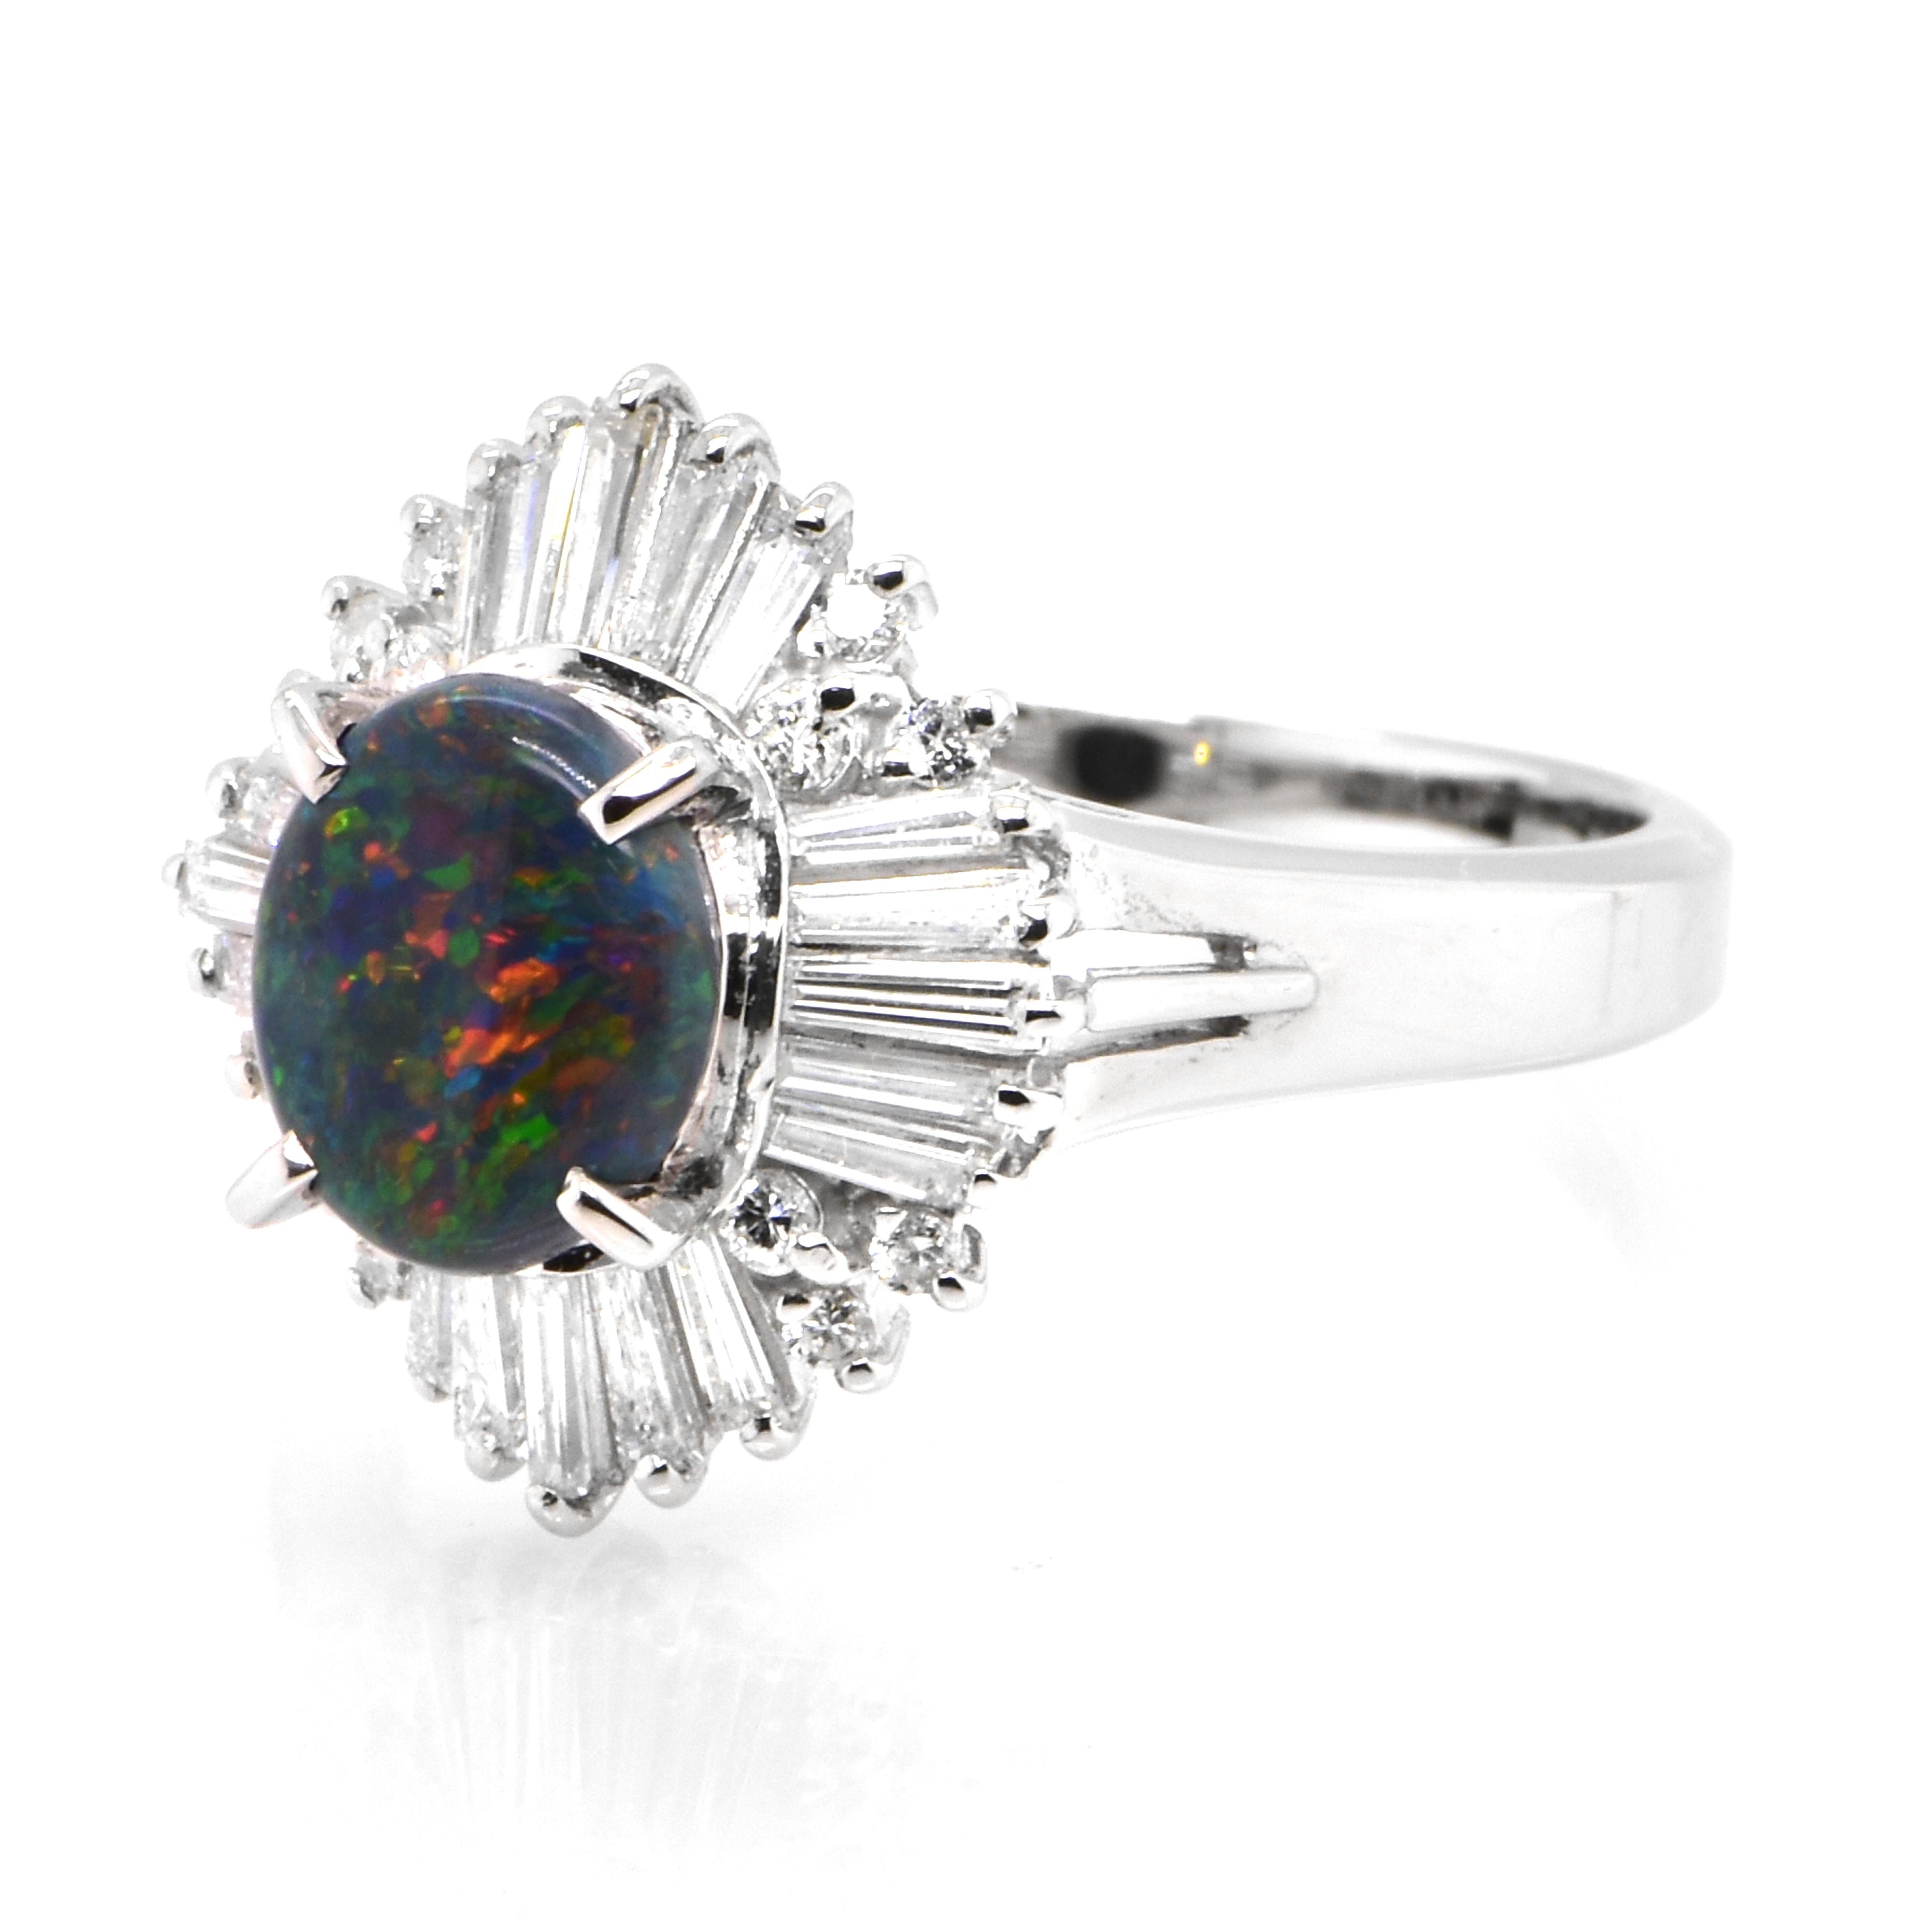 A beautiful ring featuring a 0.81 Carat, Natural, Australian Black Opal and 0.44 Carats of Diamond Accents set in Platinum. The Opal displays very good play of color! Opals are known for exhibiting flashes of rainbow colors known as 